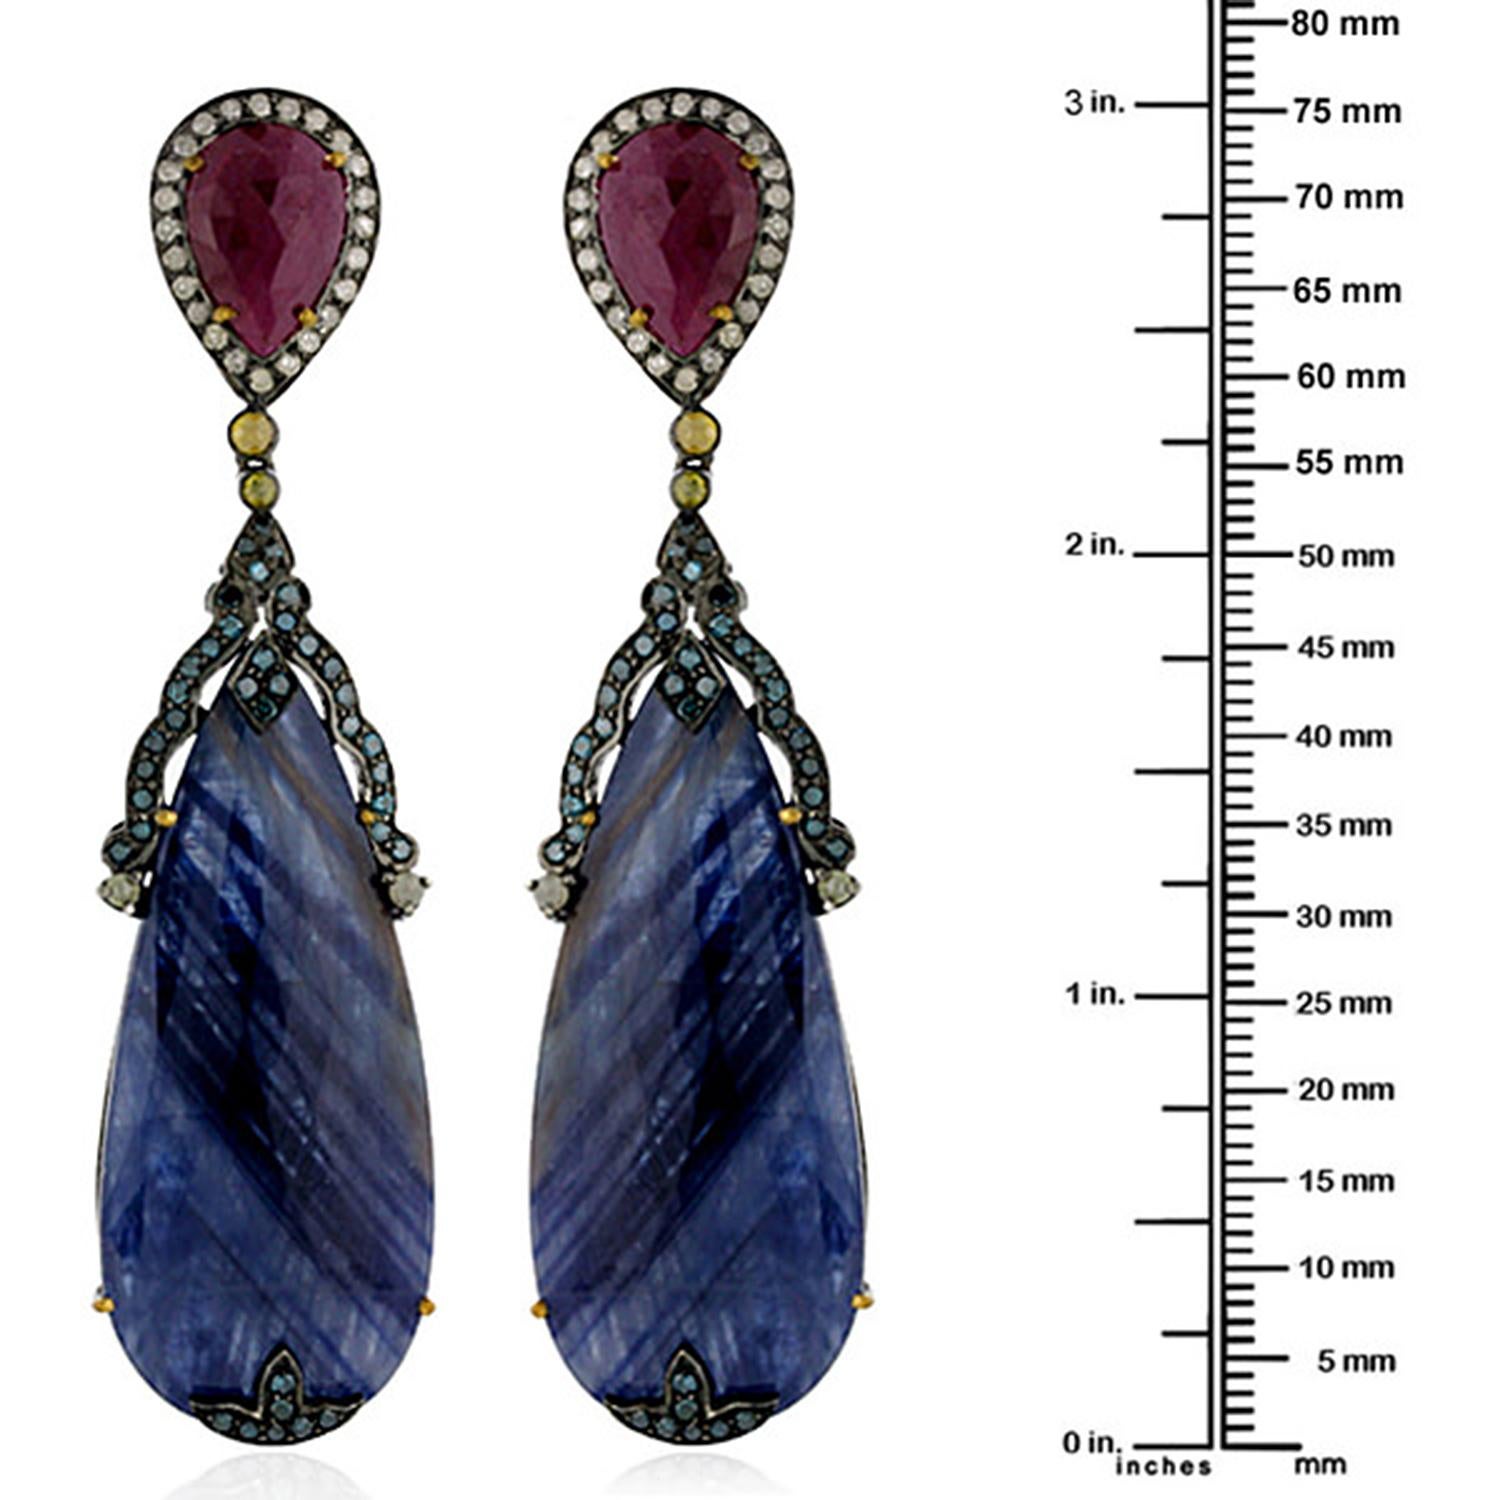 Impressive this Two-Tier Ruby and Sapphire Dangle Earring with Diamonds in 18k Gold and Silver can be worn from day to night.

Closure; Push Post

18KT Gold:2.22gms
Diamond:2.11cts
SiIver:12.35gms
Ruby:10cts
Blue Sapphire:66.7cts
